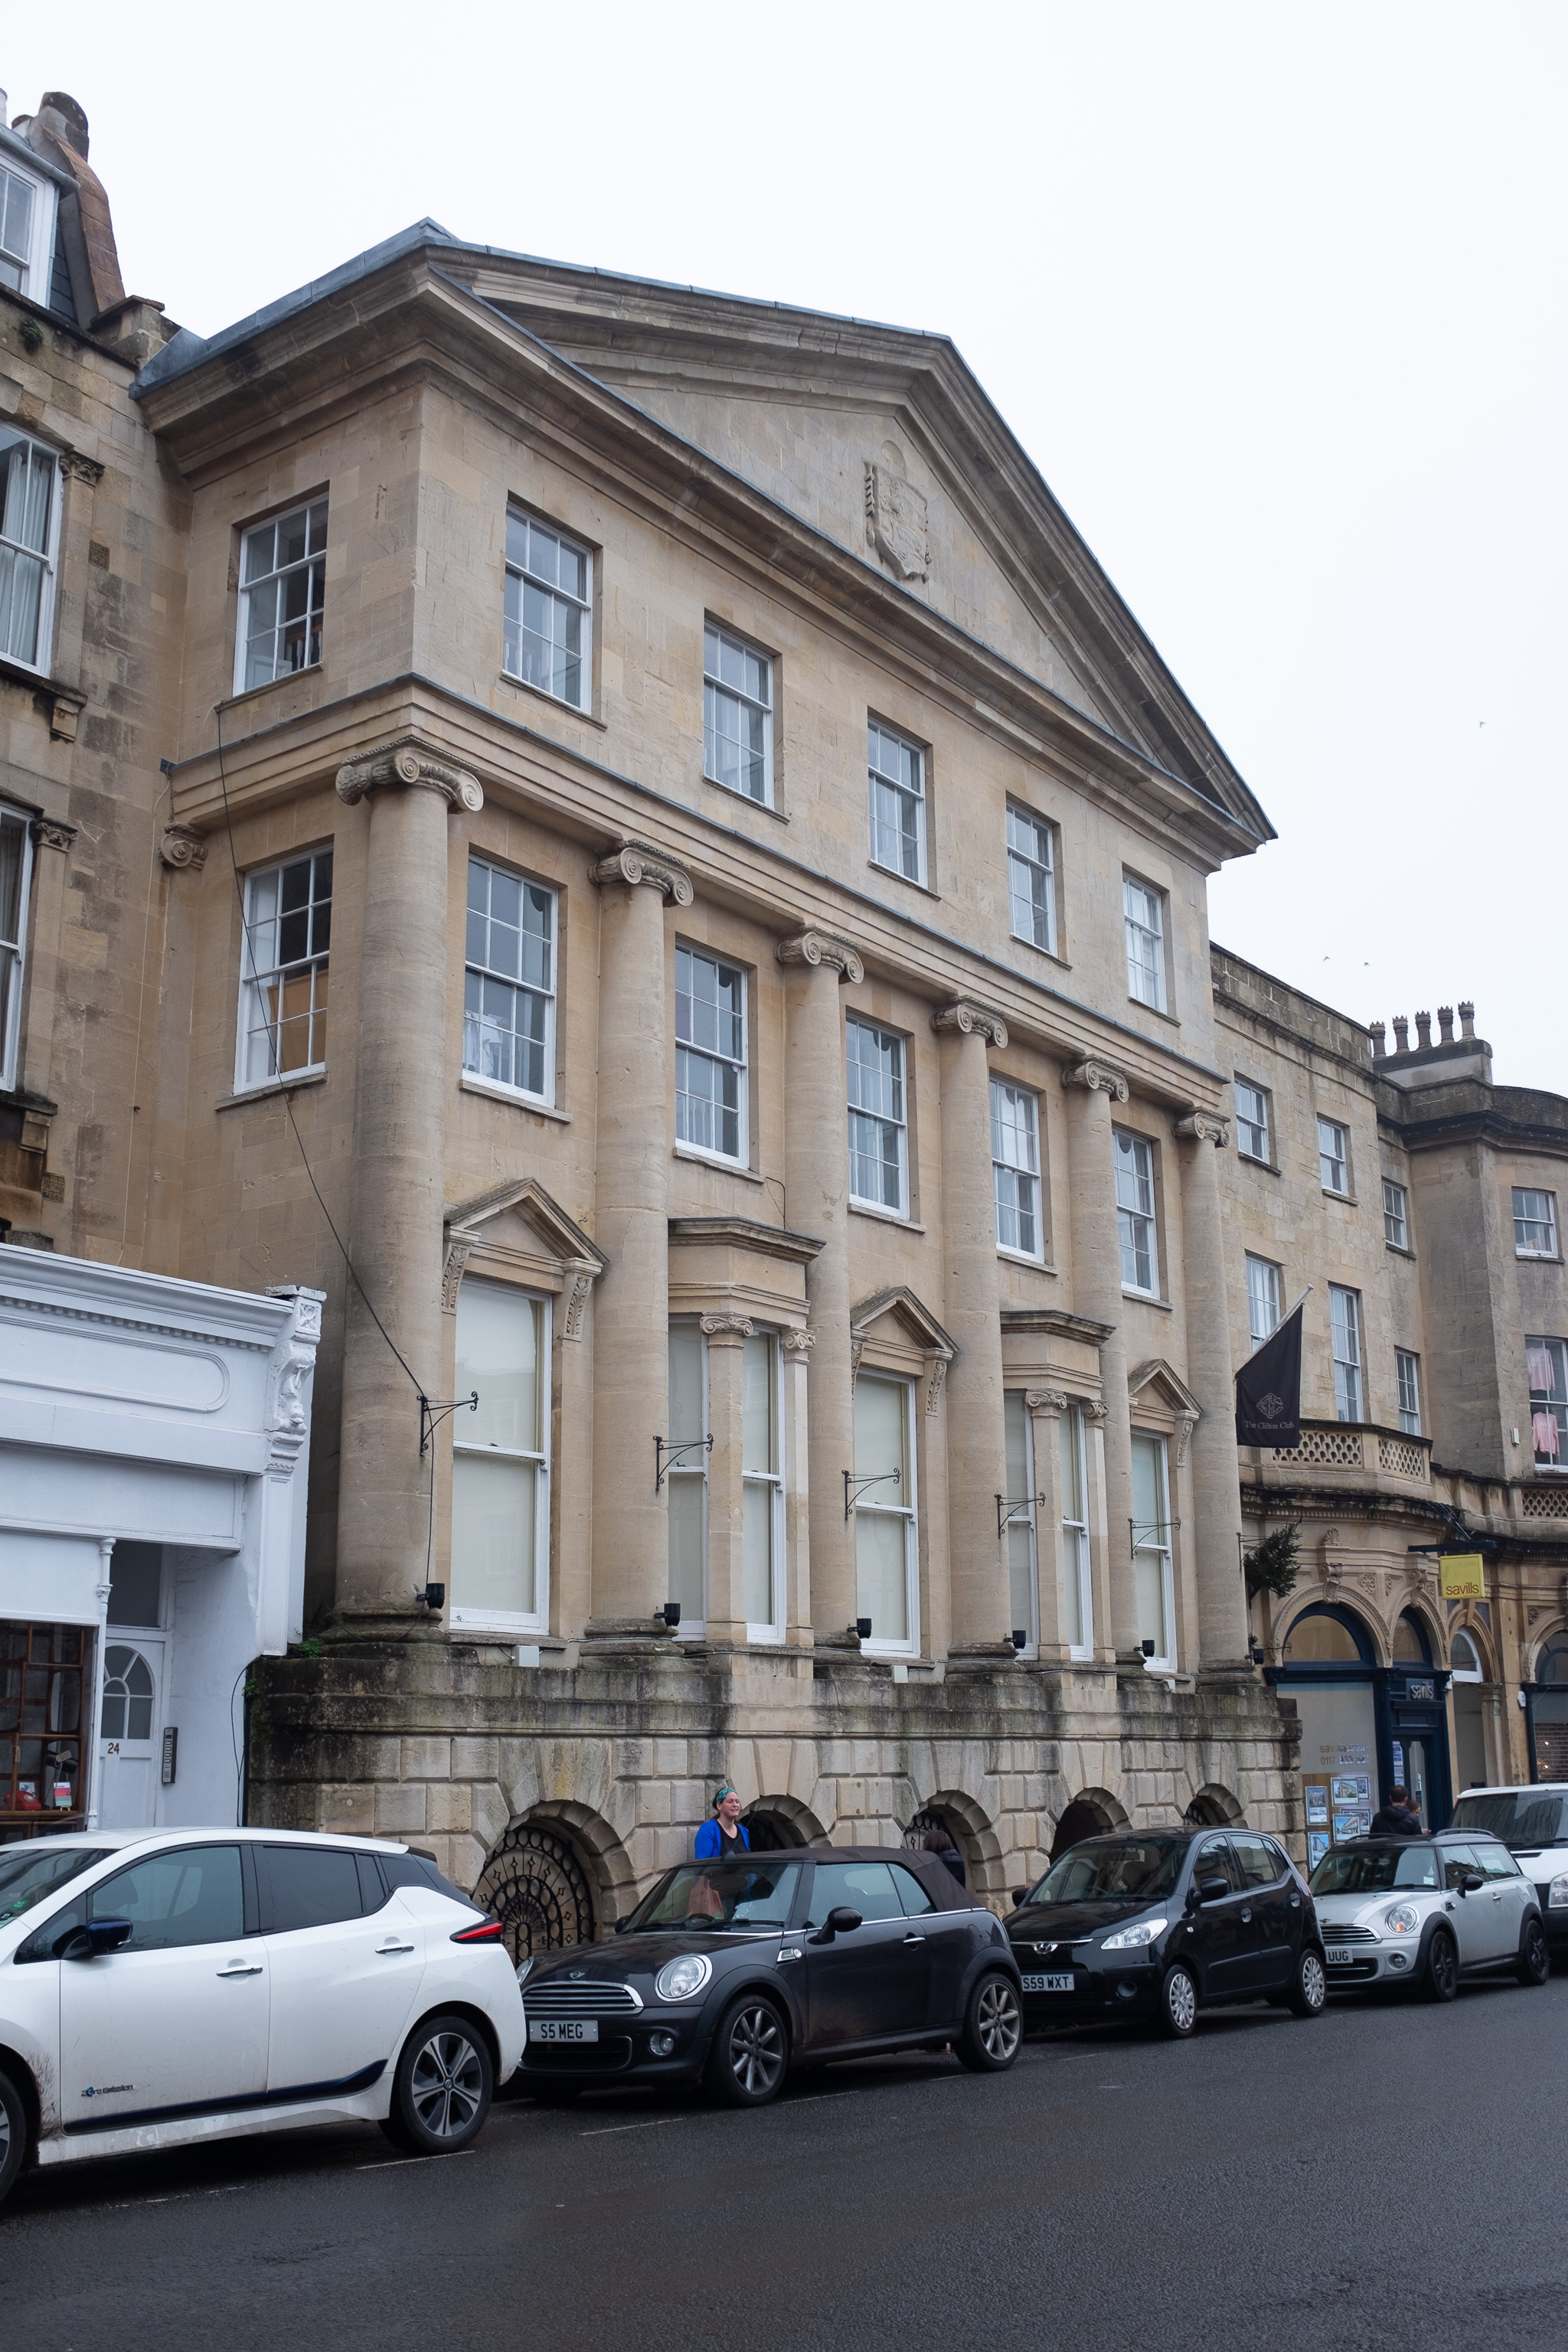 The Clifton Club
It's very nice in there. I will never be wealthy enough to be asked to join, which I understand it the only qualification I don't fulfill, being wh...